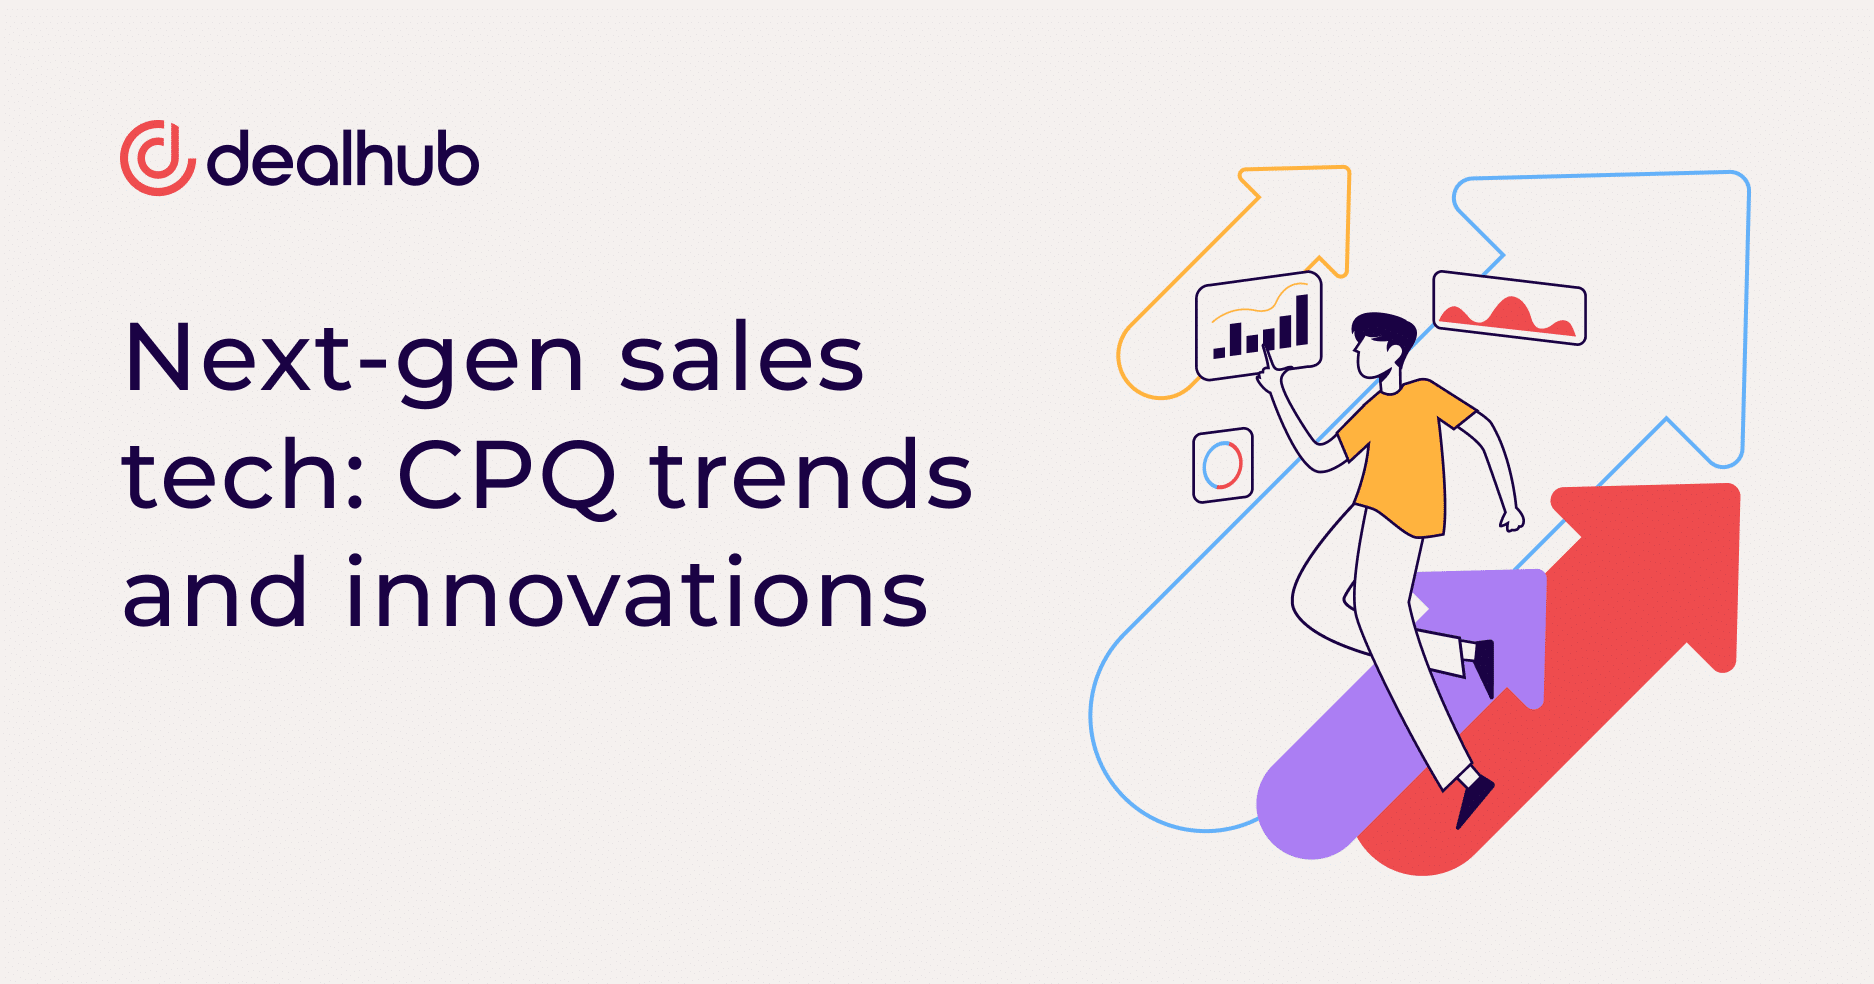 Next-gen sales tech: CPQ trends and innovations